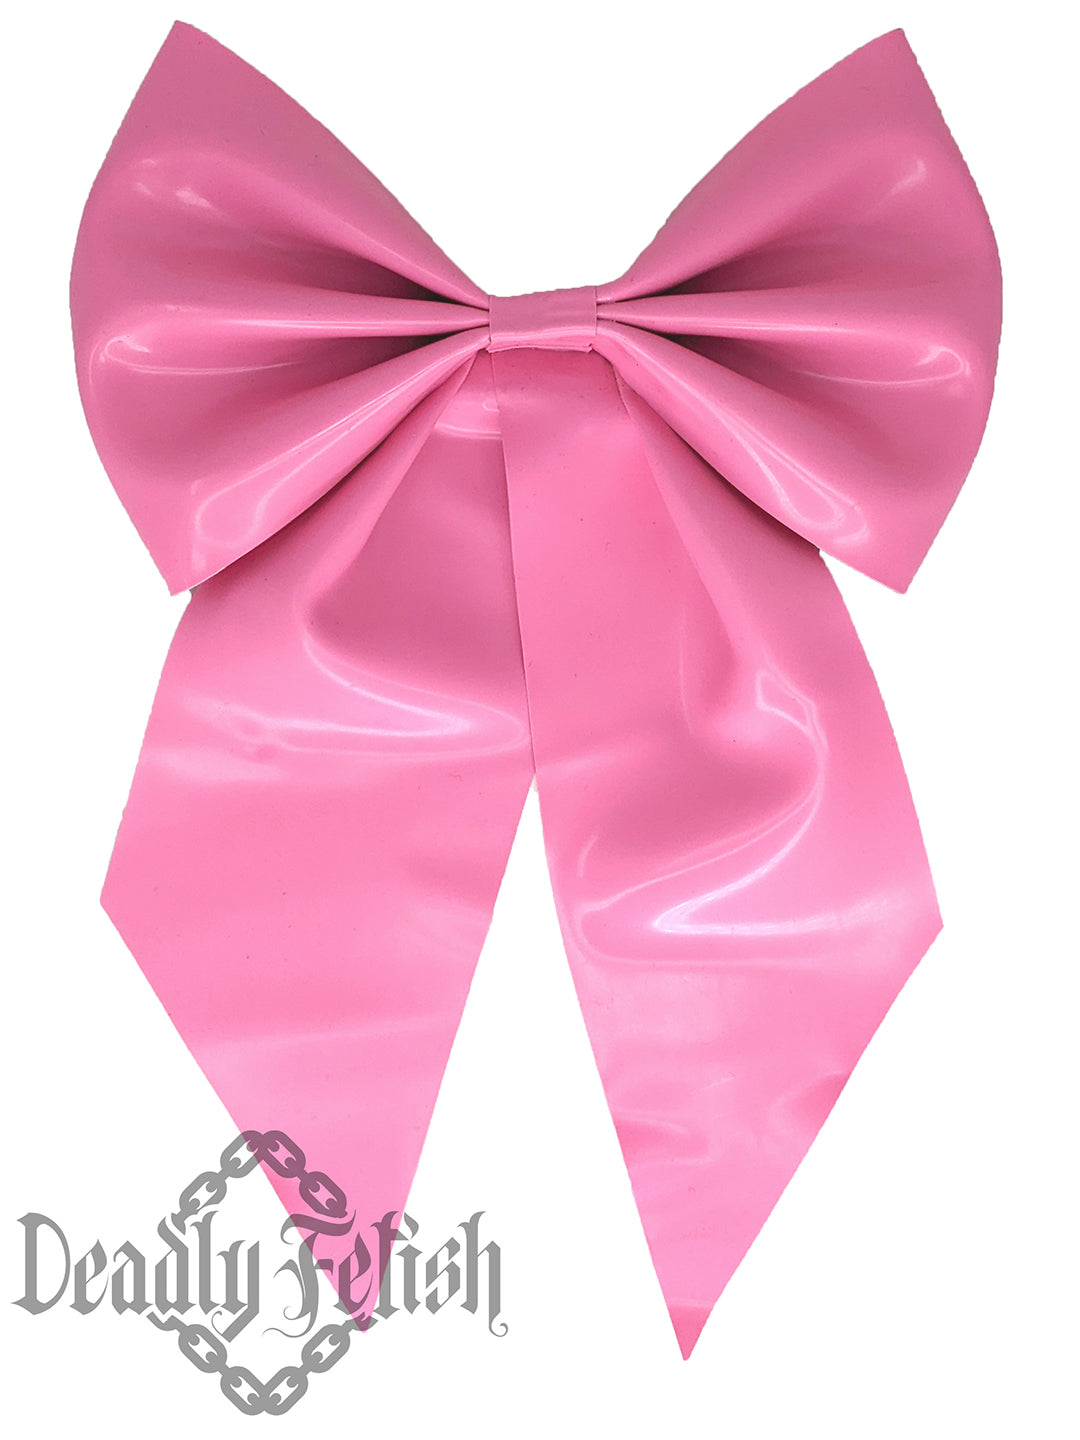 Deadly Fetish Latex: Bow with Loop